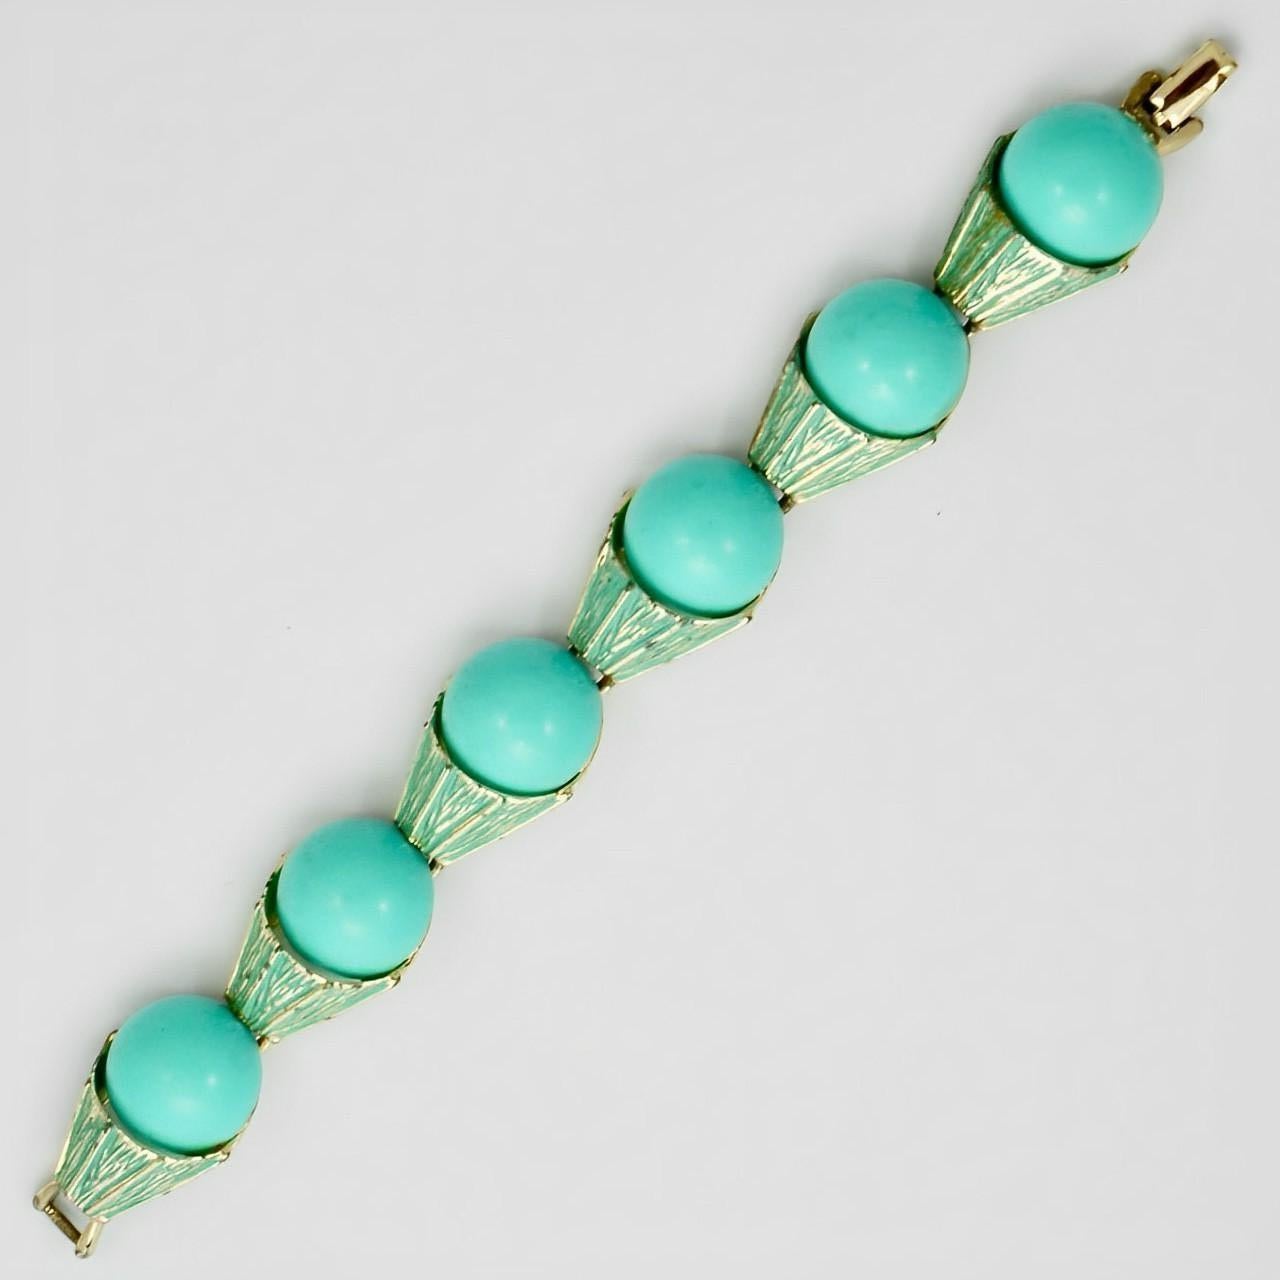 Lovely pale gold tone bracelet, featuring turquoise enamel links set with turquoise lucite domes. Measuring length 18 cm / 7 inches by width 2 cm / .78 inch. There is wear to the gold plating.

This is a stylish and unusual lucite bracelet, a